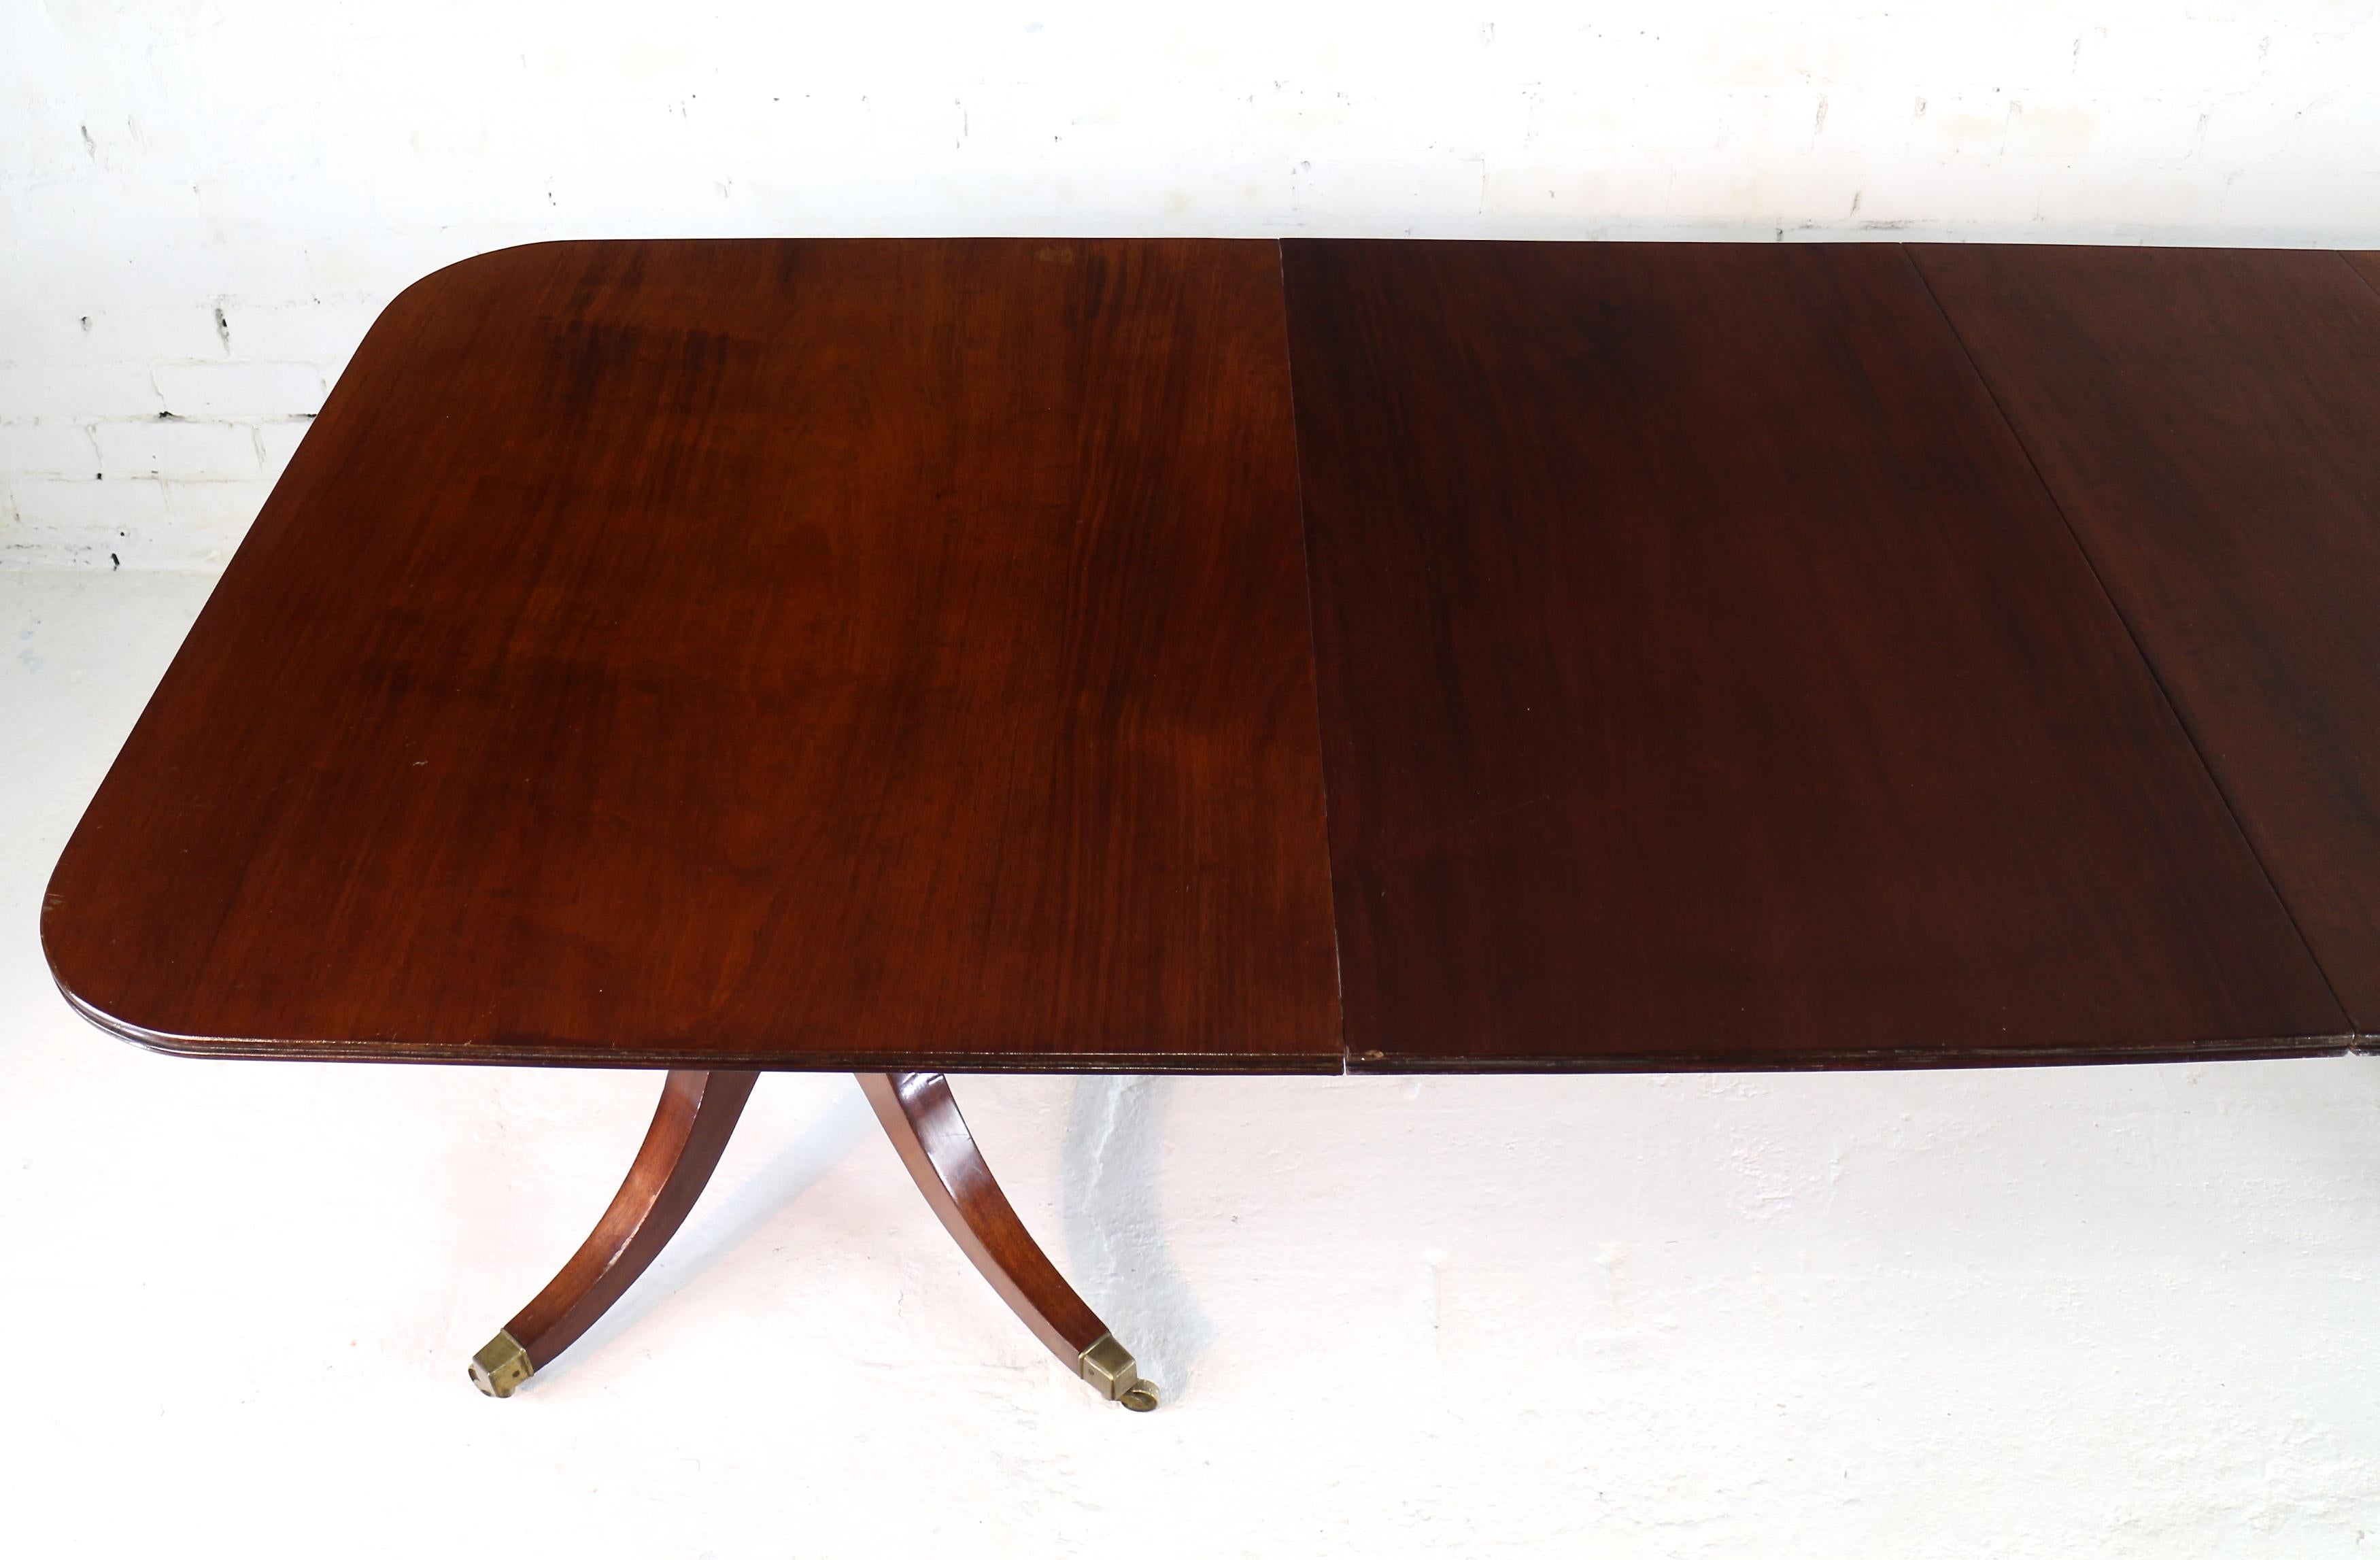 20th Century Antique English Regency & Later Solid Mahogany Extending Two Pillar Dining Table